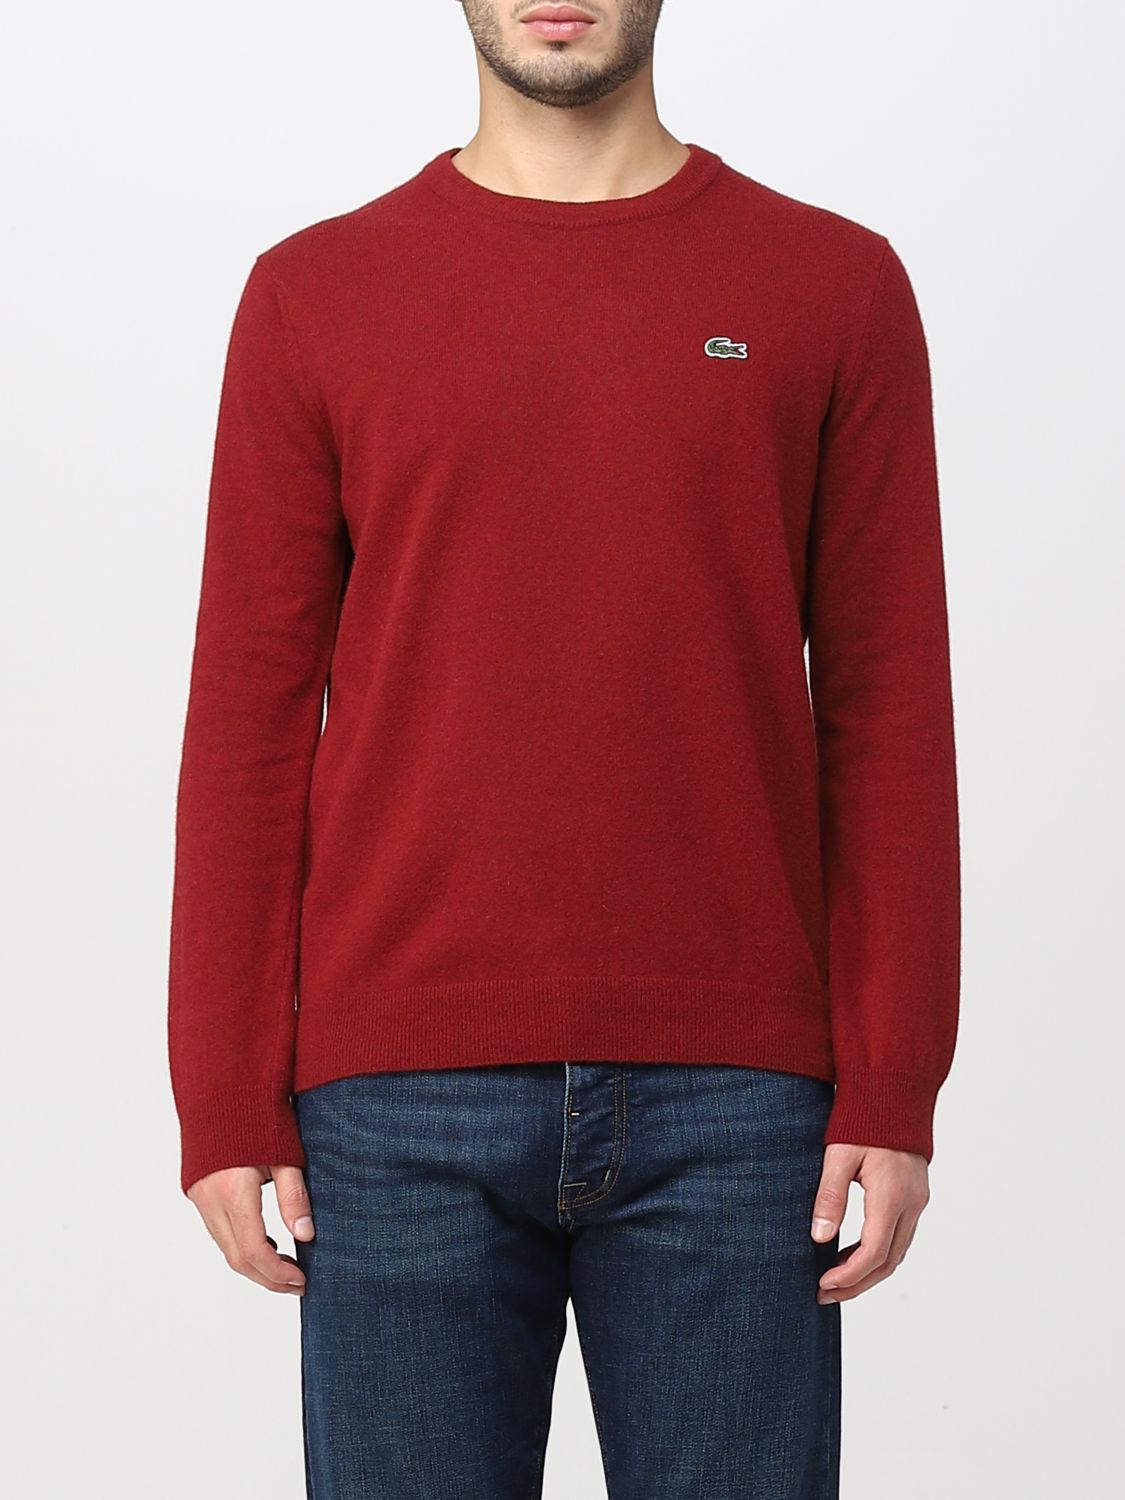 Voetzool hoe te gebruiken Winderig Lacoste Outlet: sweater for man - Red | Lacoste sweater AH3449 online on  GIGLIO.COM